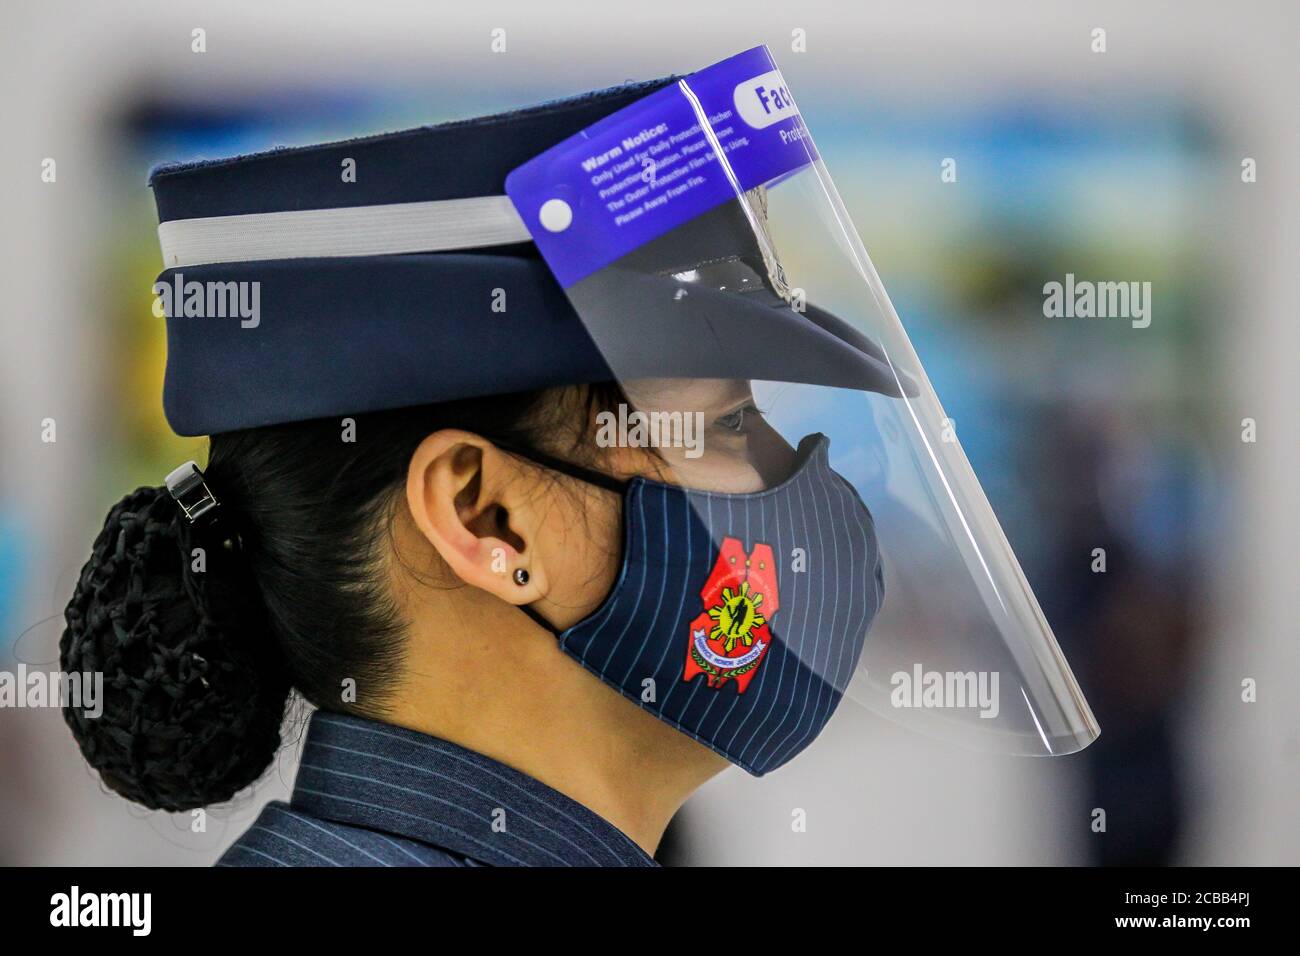 (200812) -- RIZAL, Aug. 12, 2020 (Xinhua) -- A police officer is seen wearing a face shield amid the COVID-19 outbreak in Rizal Province, the Philippines, on Aug. 12, 2020. (Xinhua/Rouelle Umali) Stock Photo